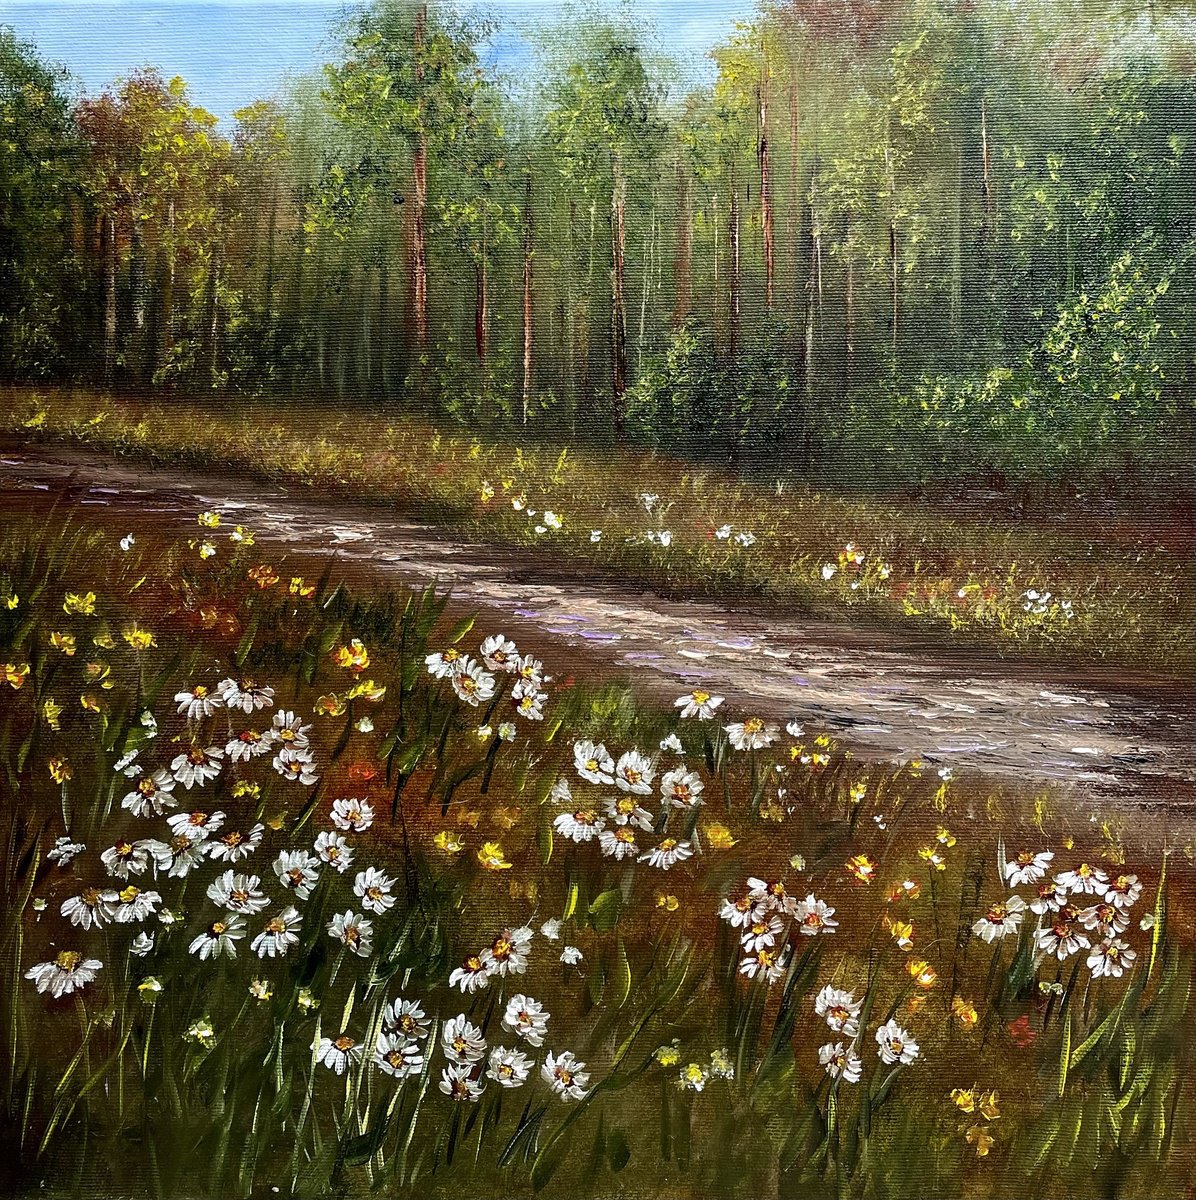 Blooming path near the forest by Tanja Frost